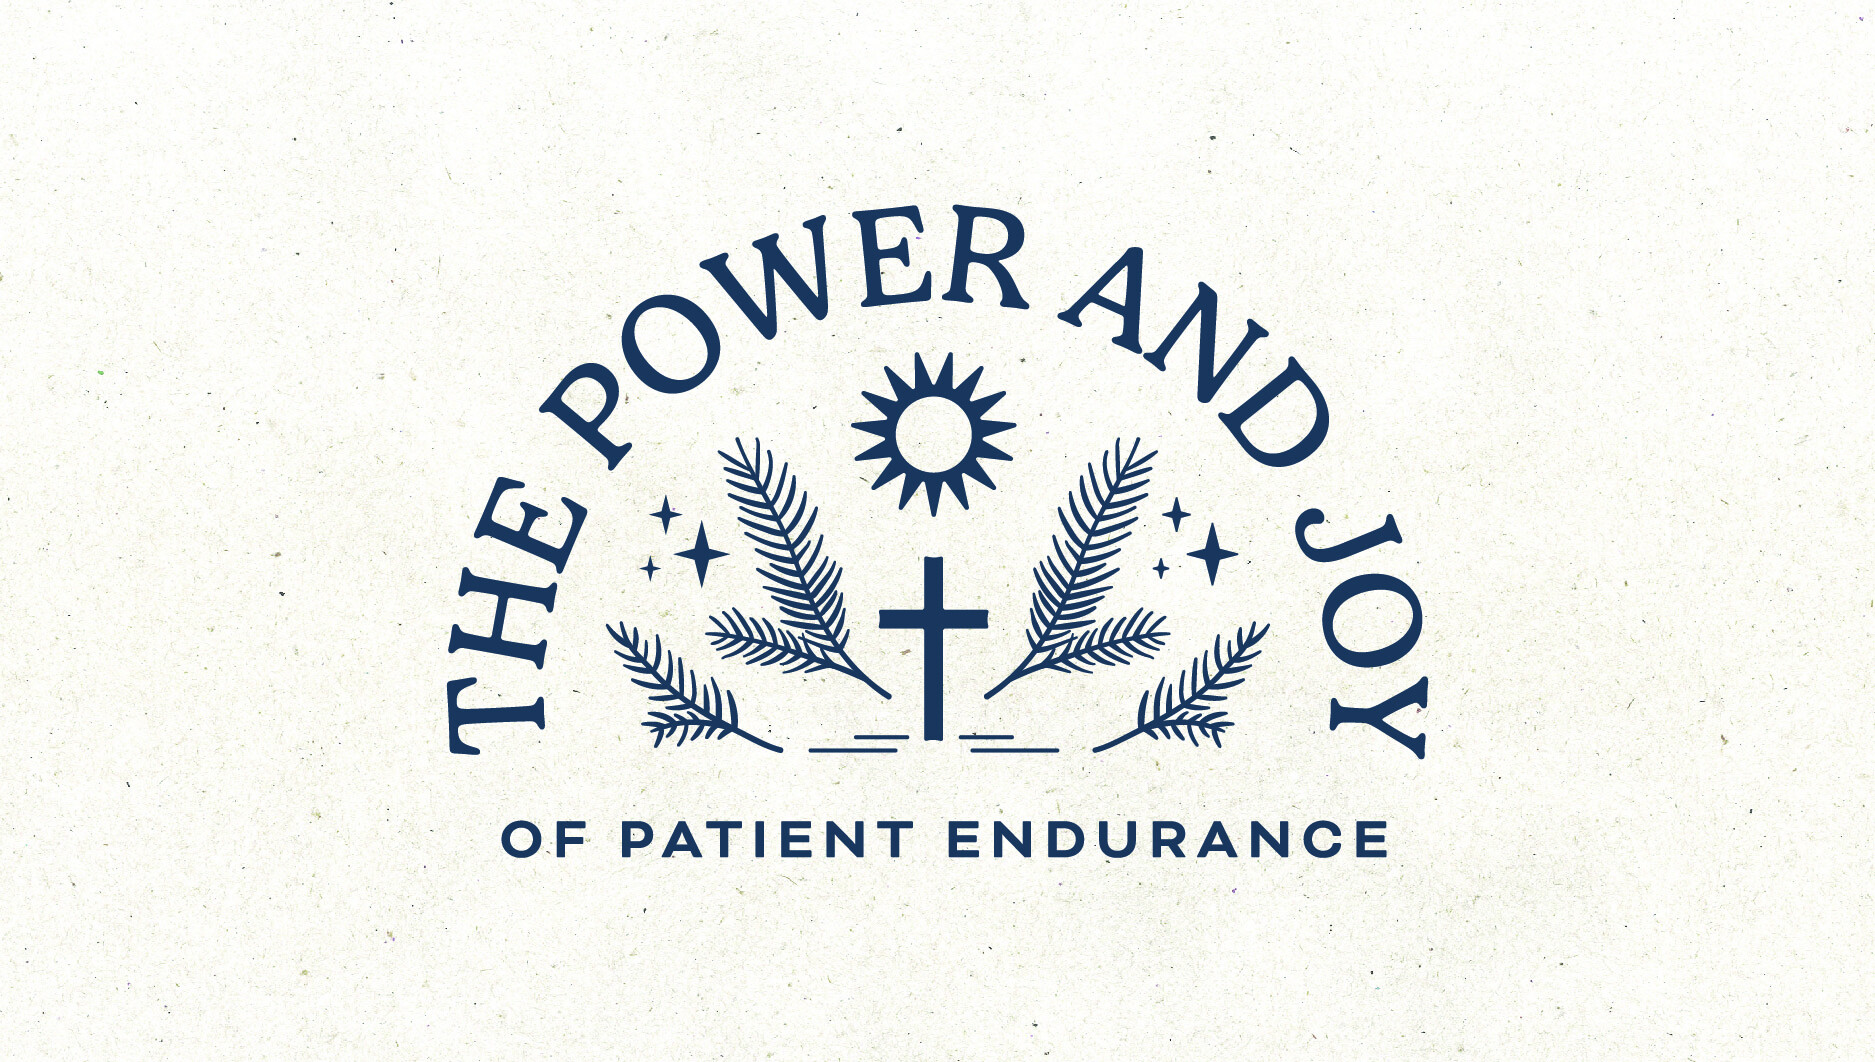 The Power and Joy of Patient Endurance